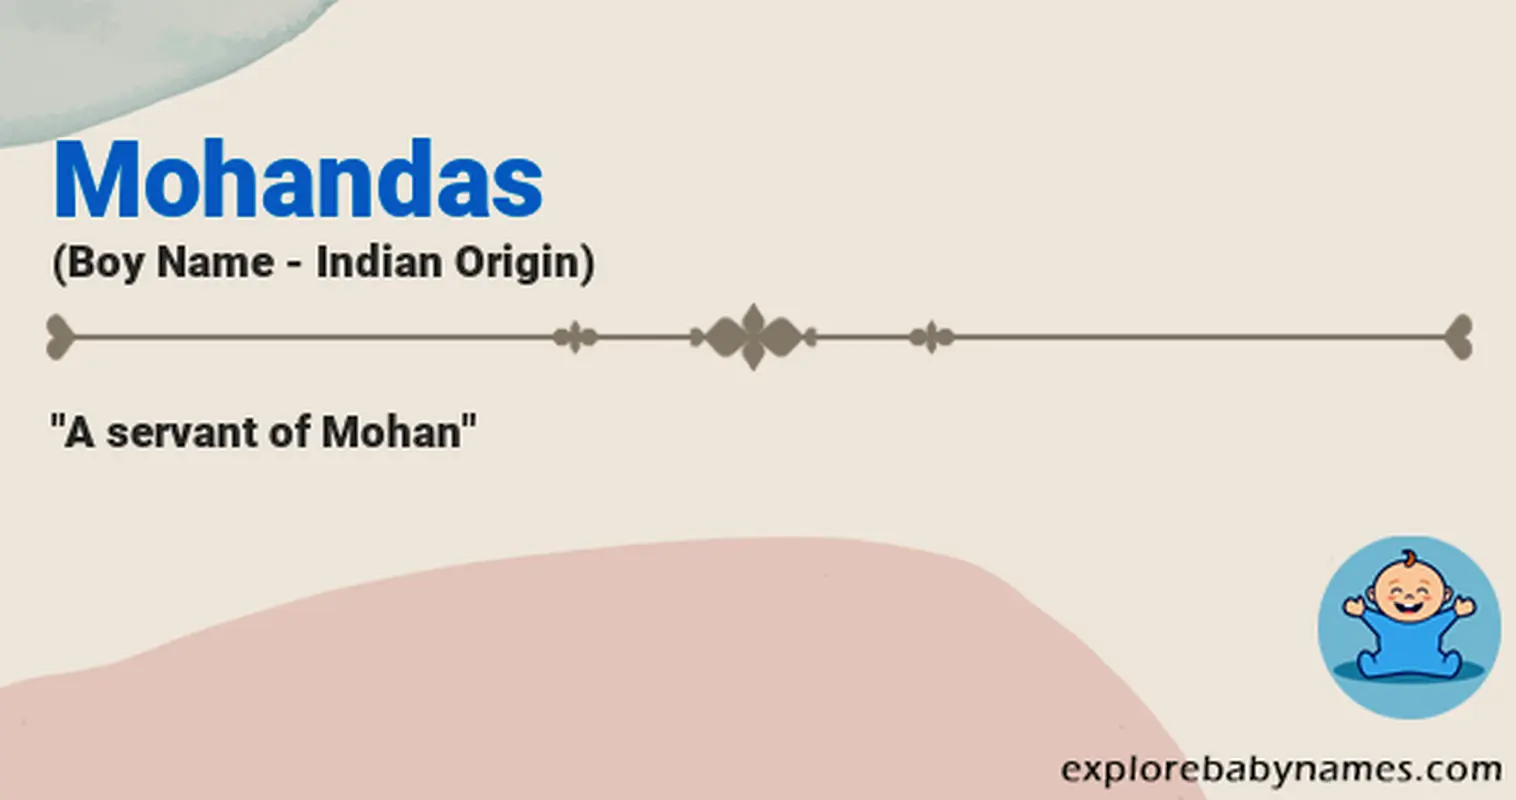 Meaning of Mohandas